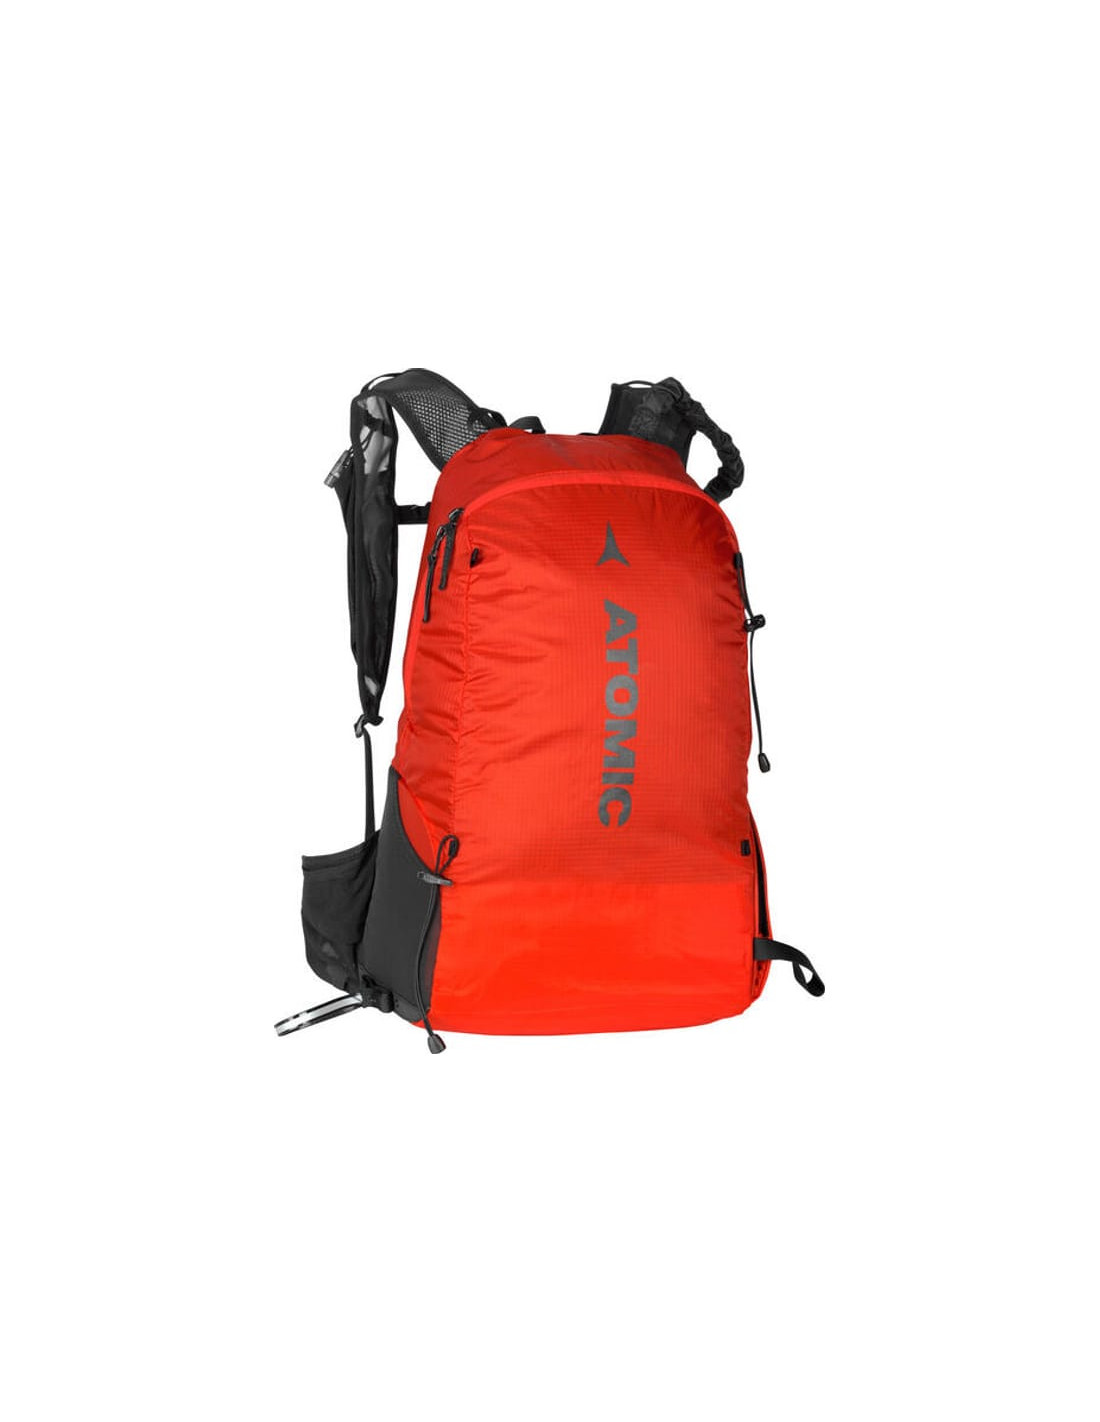 BACKLAND UL RACE RED